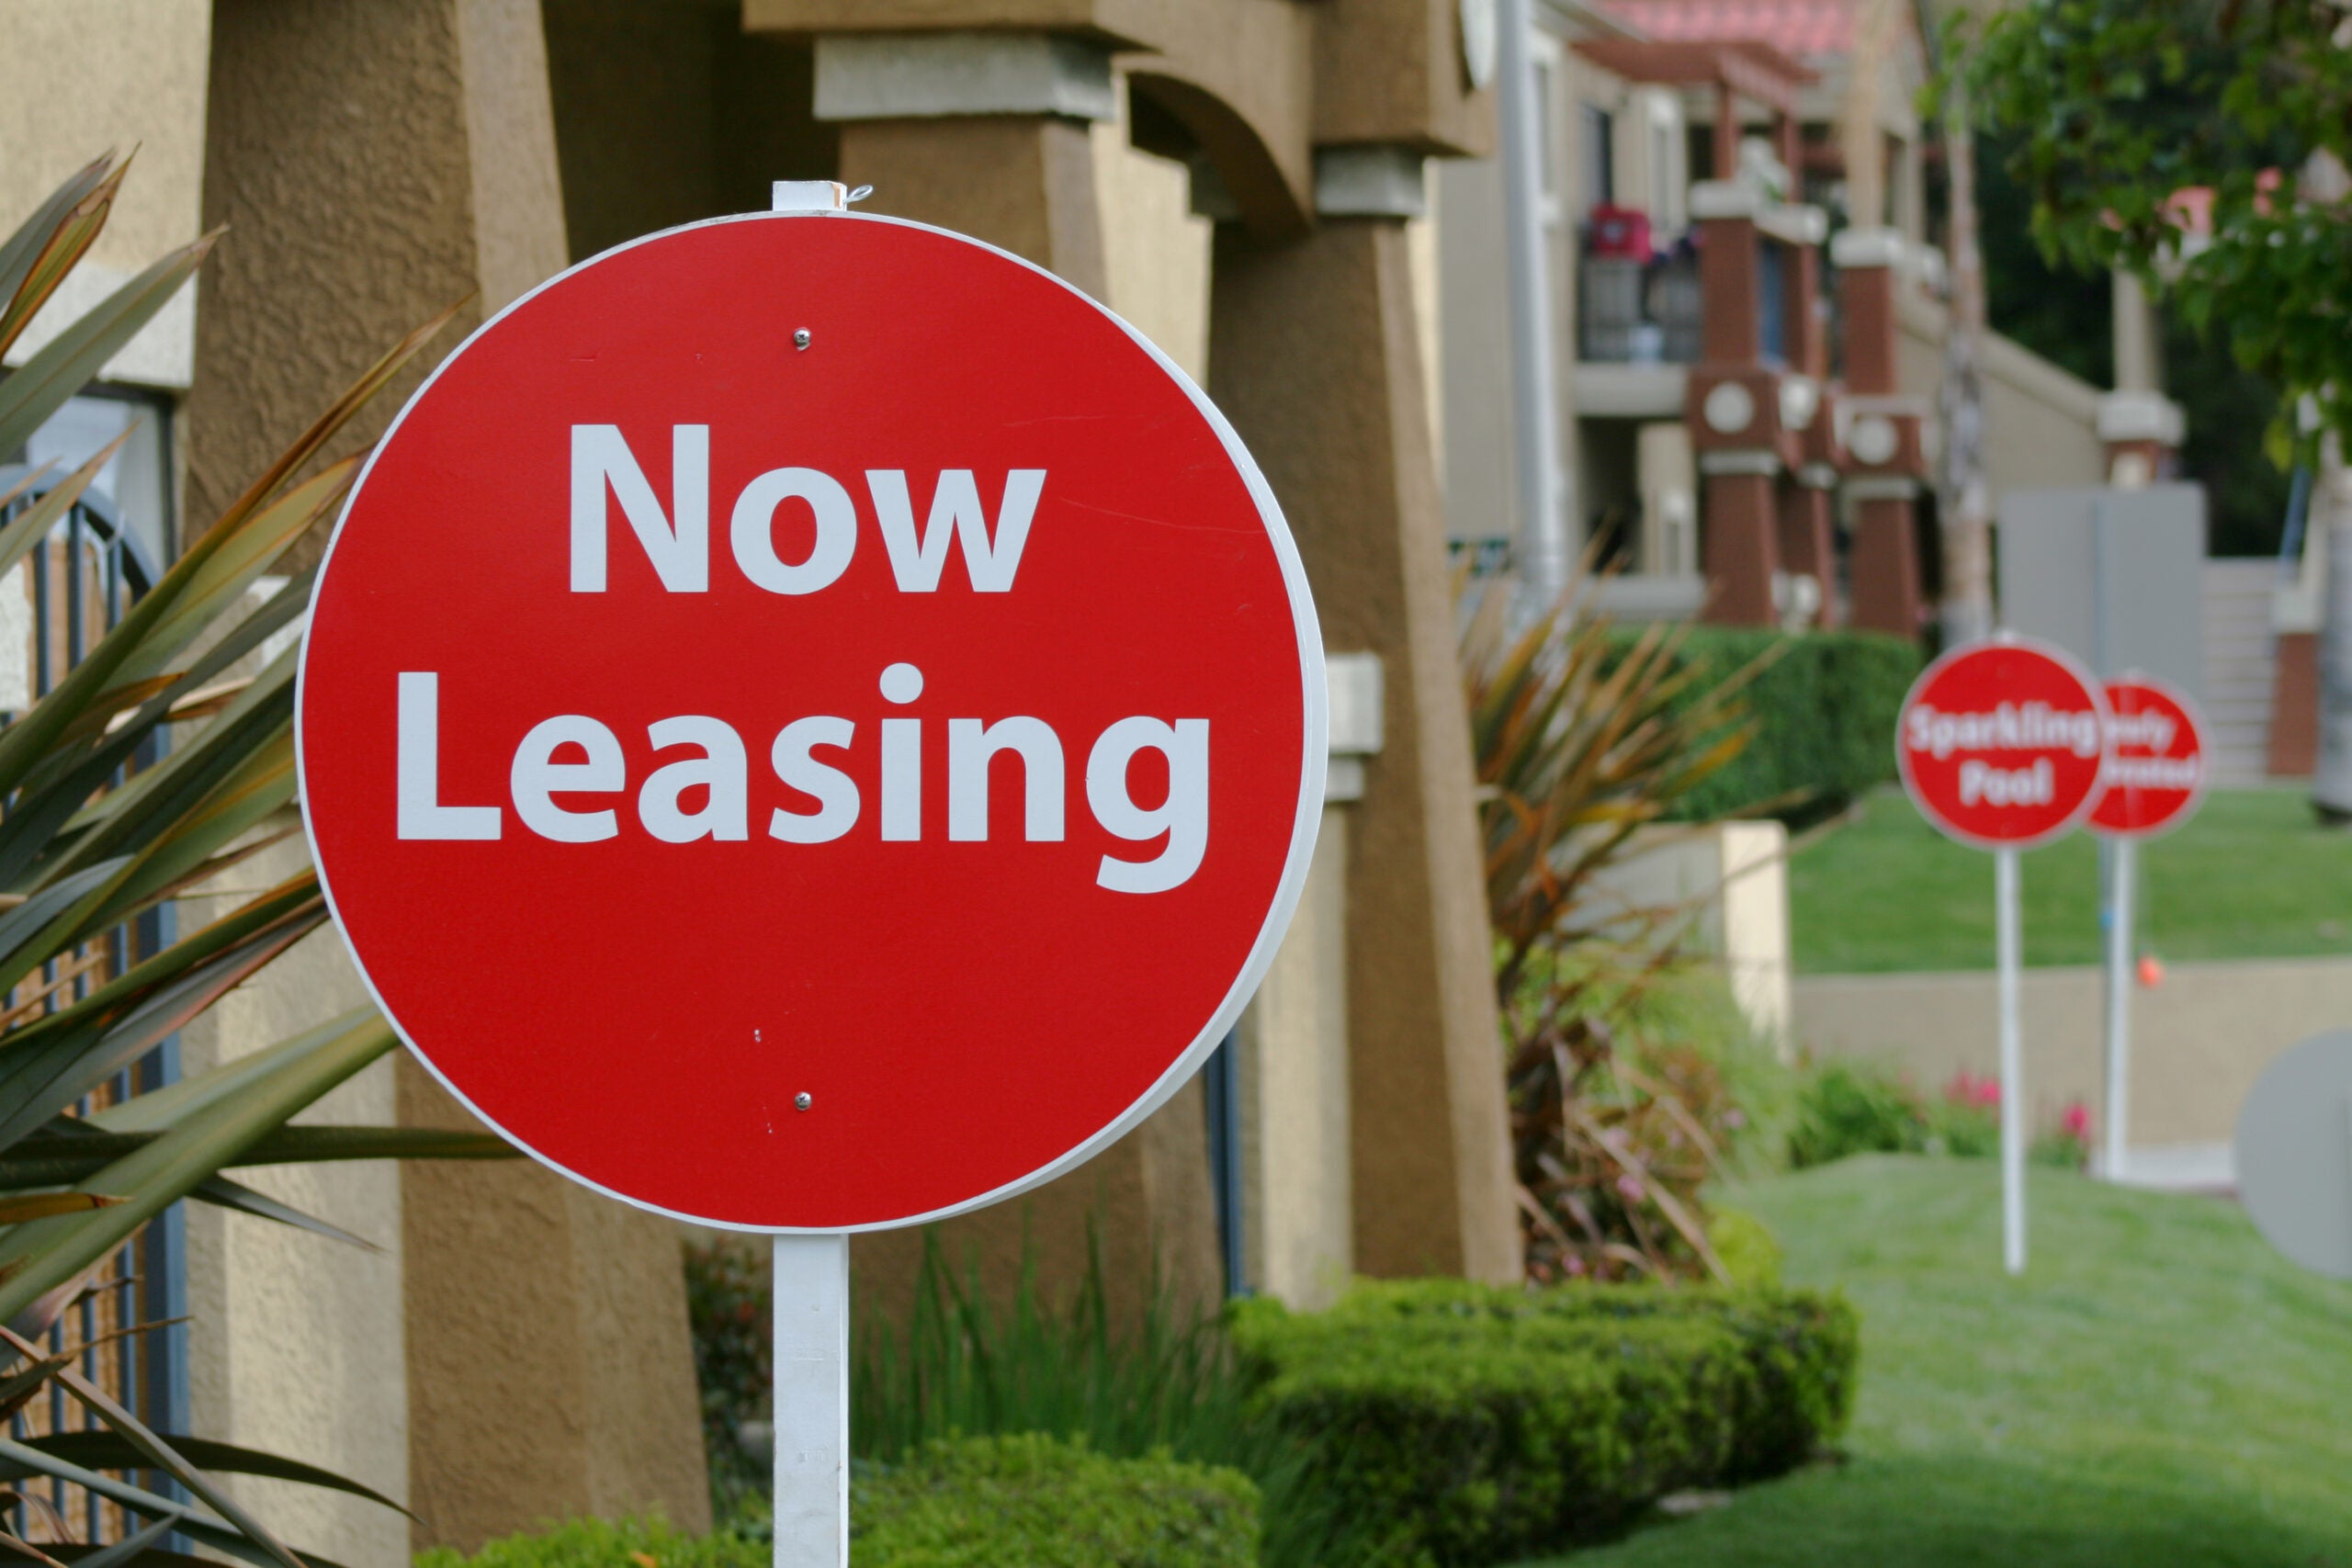 Red and white Now Leasing sign in front of a Rental Property.